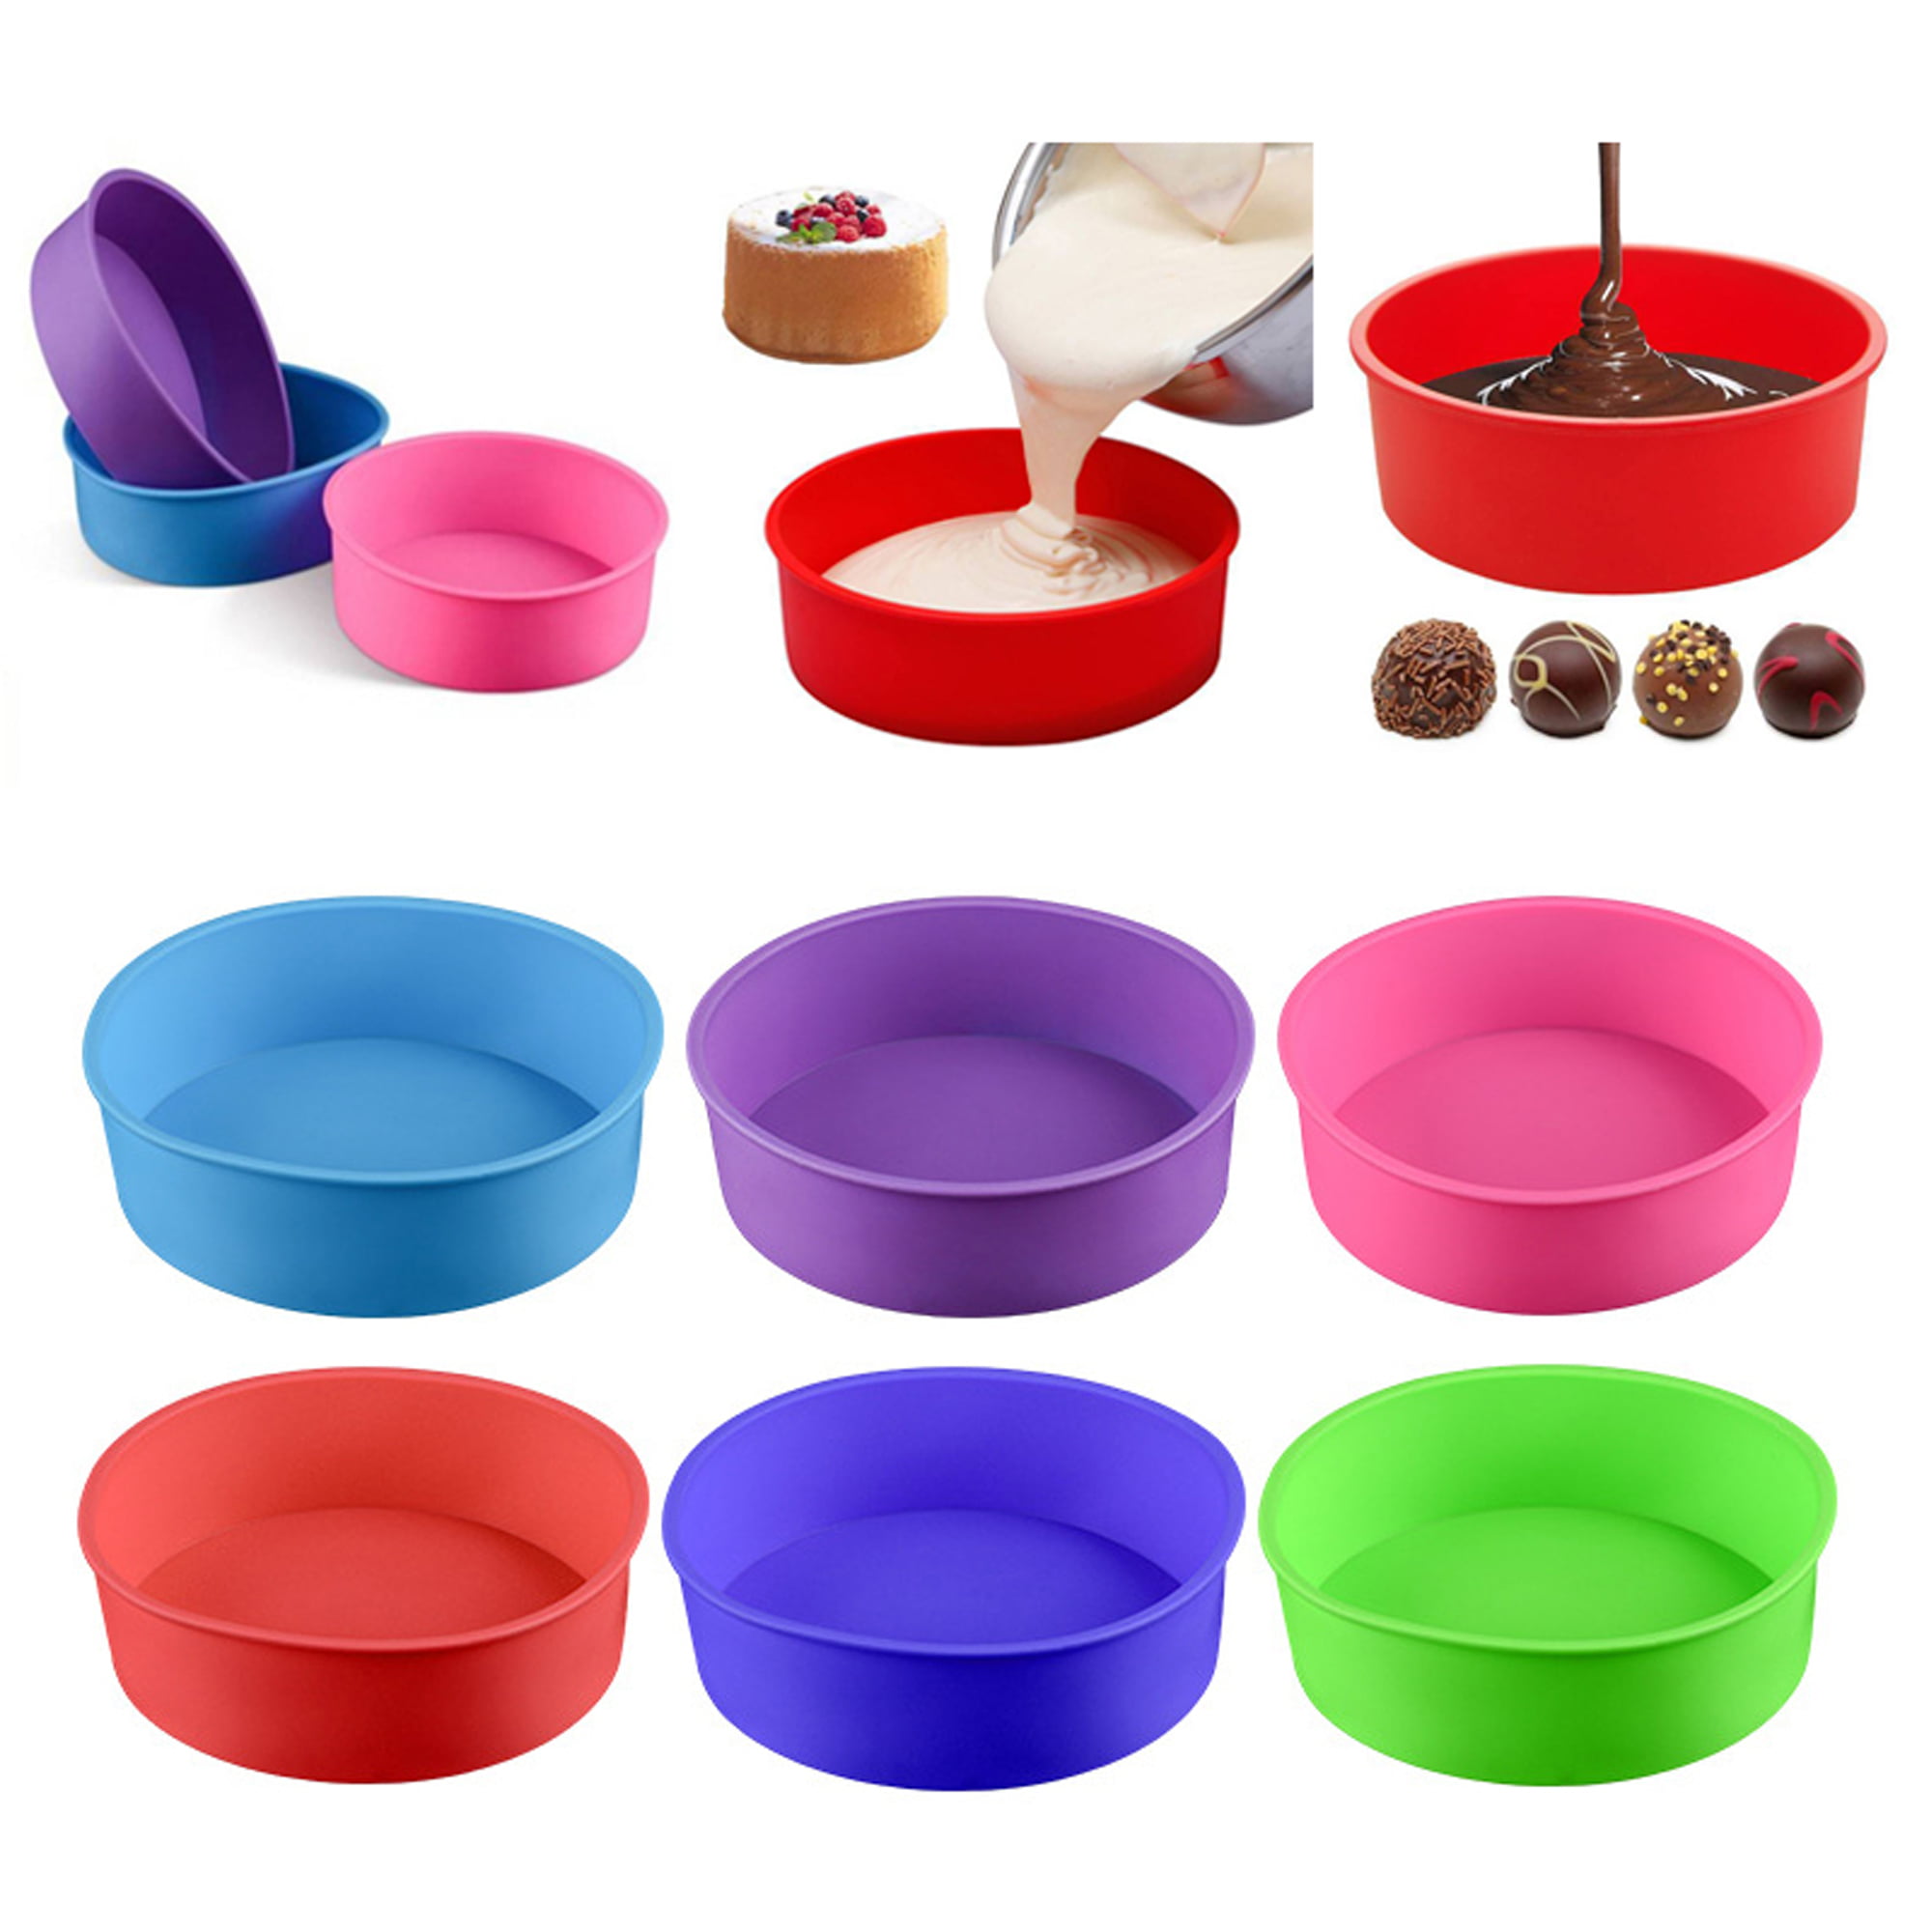 7 Inch Round Bread Cake Pan Bakeware Mold Baking Tray Mould Kitchen Ovenware 